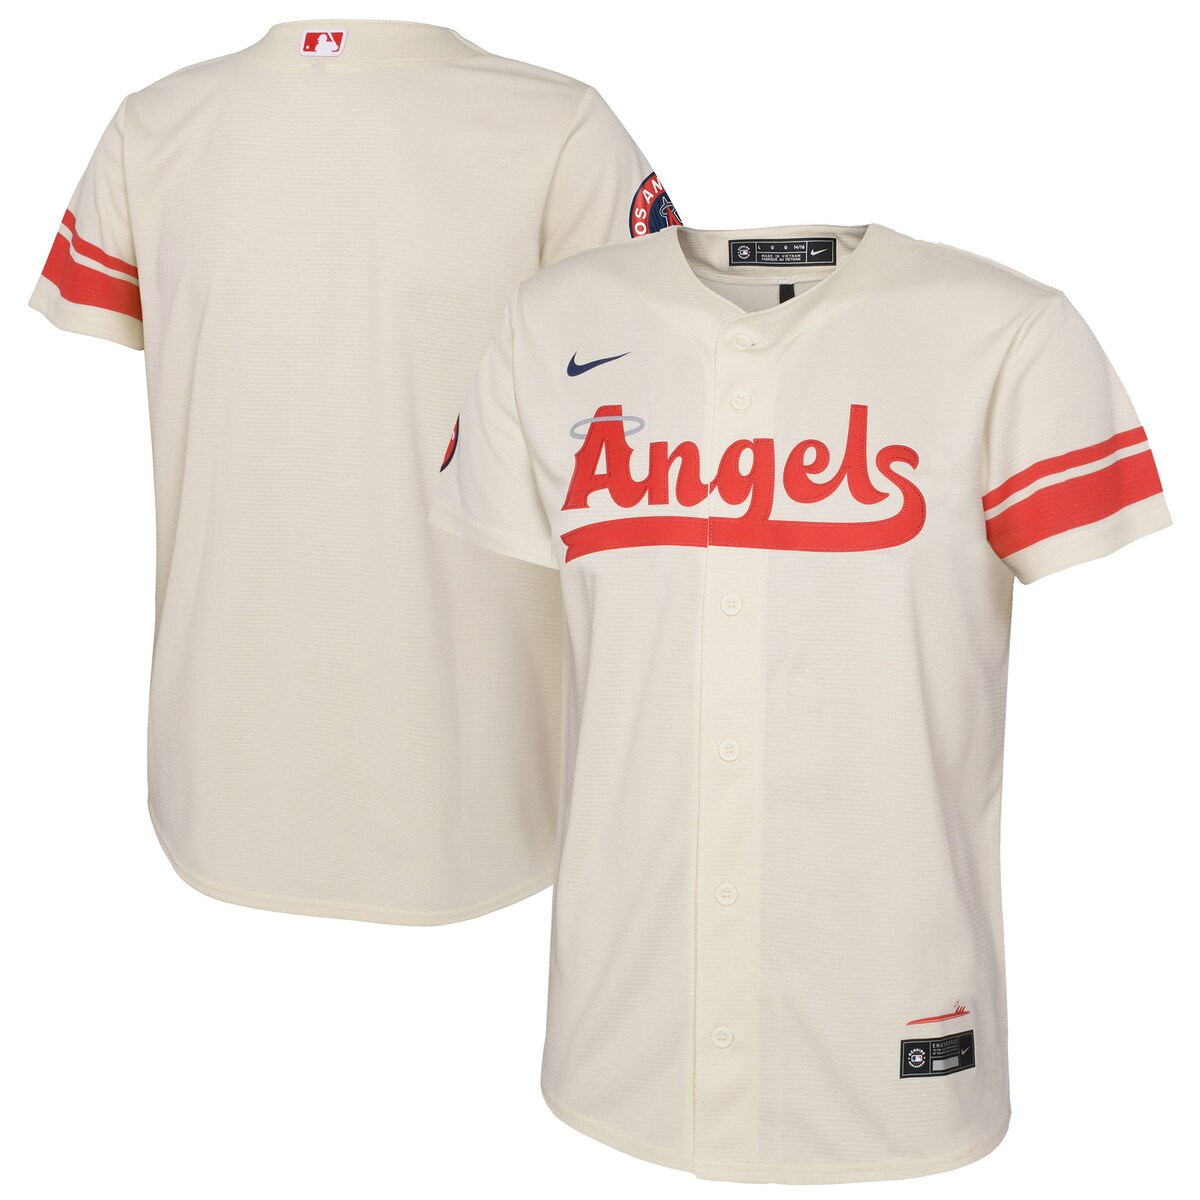 Get your youngster a truly unique piece for their Los Angeles Angels collection of gear with this new 2022 City Connect Replica Jersey. This special Nike piece is perfect for your kiddo, whether they were born at the beach or have fallen in love with the laid back surf culture that Southern California provides. The design of this gear is inspired by immaculate Huntington Beach vibes and the unwavering free and easy mood of Angels fans. Snag some of this fresh new gear to let your young one stand out at the game or in the sand on the weekend, and make sure everyone knows where they are from and who they root for.Short sleeveMLB Batterman applique on center back neckMachine wash gentle or dry clean. Tumble dry low, hang dry preferred.Heat-sealed jock tagHeat-sealed transfer appliqueOfficially licensedReplica JerseyImportedBrand: NikeRounded hemMaterial: 100% PolyesterFull-button front